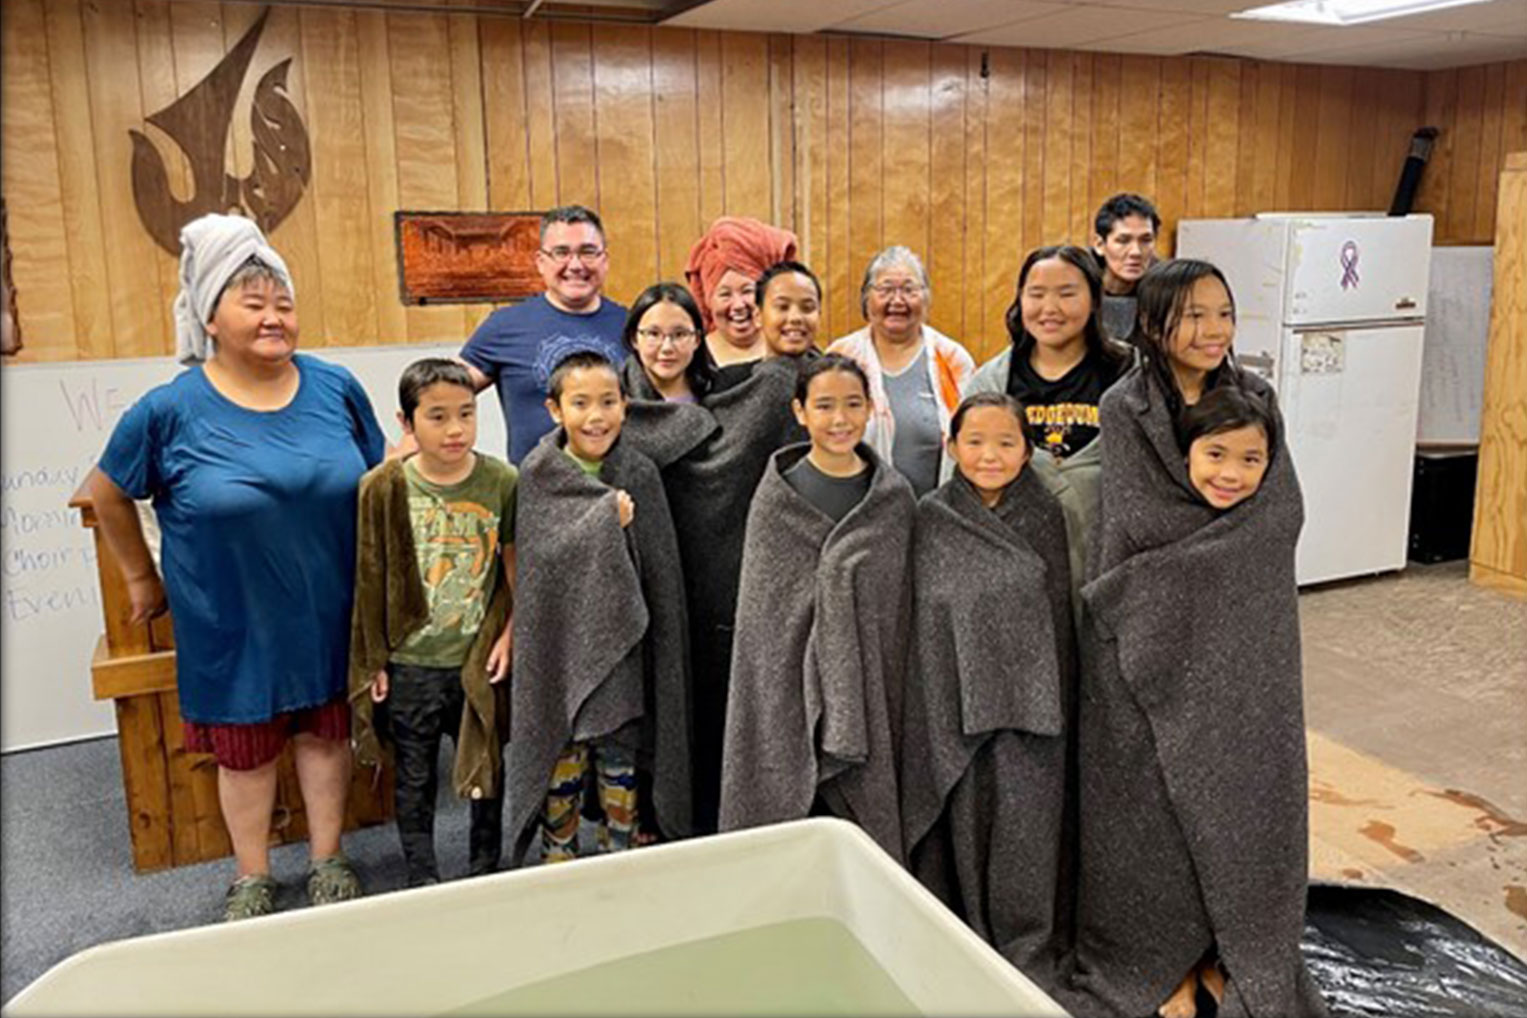 A number of children and adults were baptized over the summer.